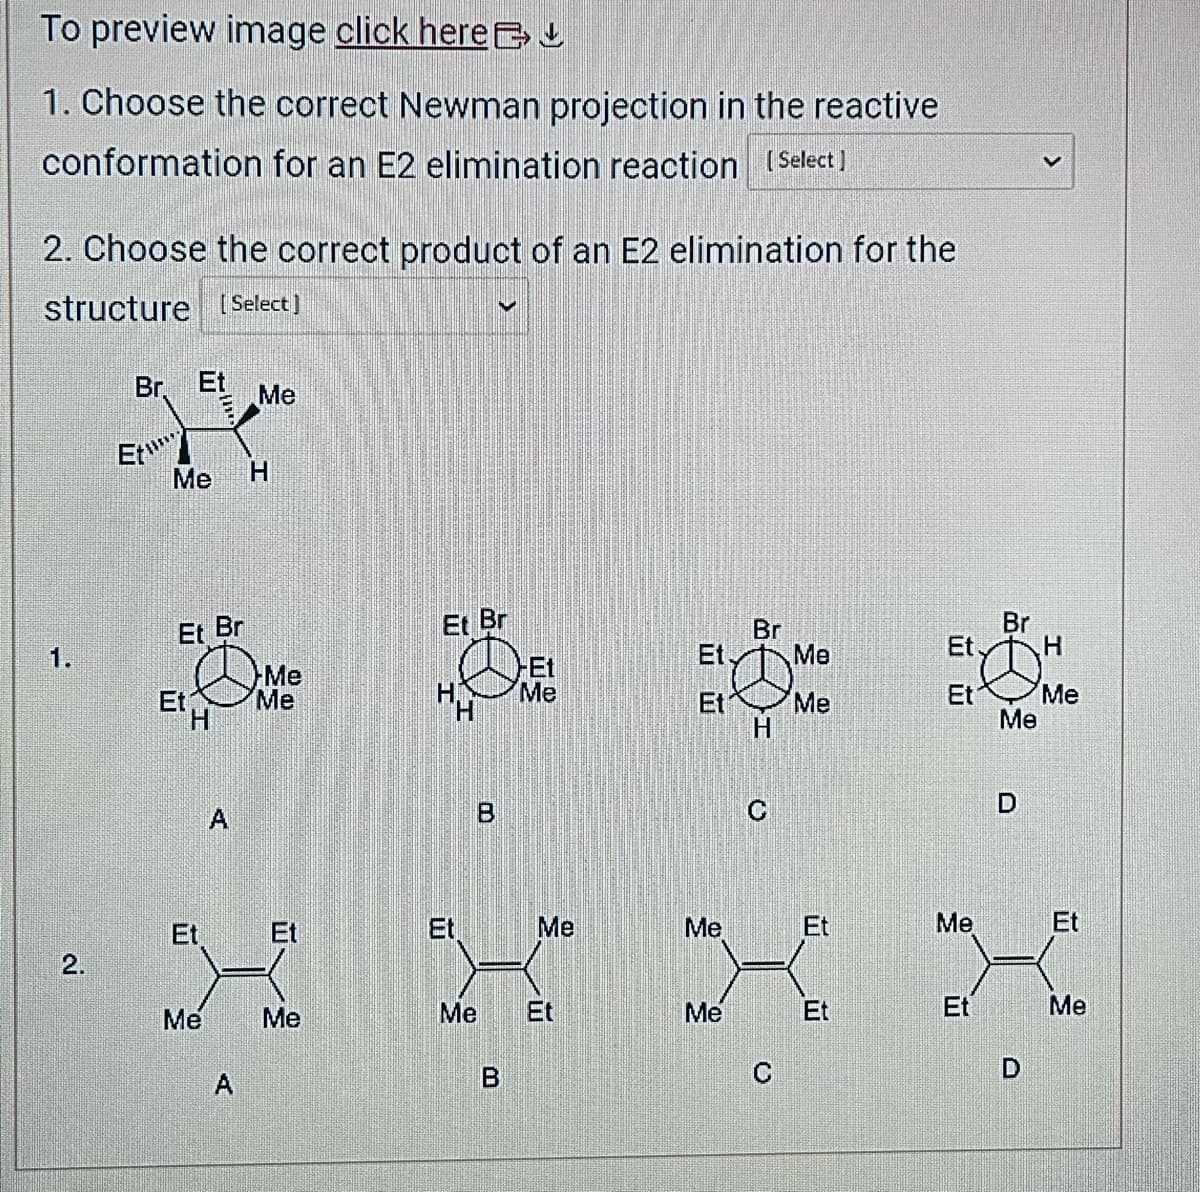 To preview image click here
1. Choose the correct Newman projection in the reactive
conformation for an E2 elimination reaction [Select]
2. Choose the correct product of an E2 elimination for the
structure [Select]
1.
2.
Br. Et Me
Et
Me H
Et Br
Et
H
Me
A
A
Me
Me
Et
Me
Et Br
HA
T
B
V
Me
B
-Et
Me
Me
·
Et
Et,
Et
Br
H
C
Me
Me
Me
Et
X
Me
Et
C
Et.
Et
Me
Et
Br
Me
D
D
H
Me
Et
Me